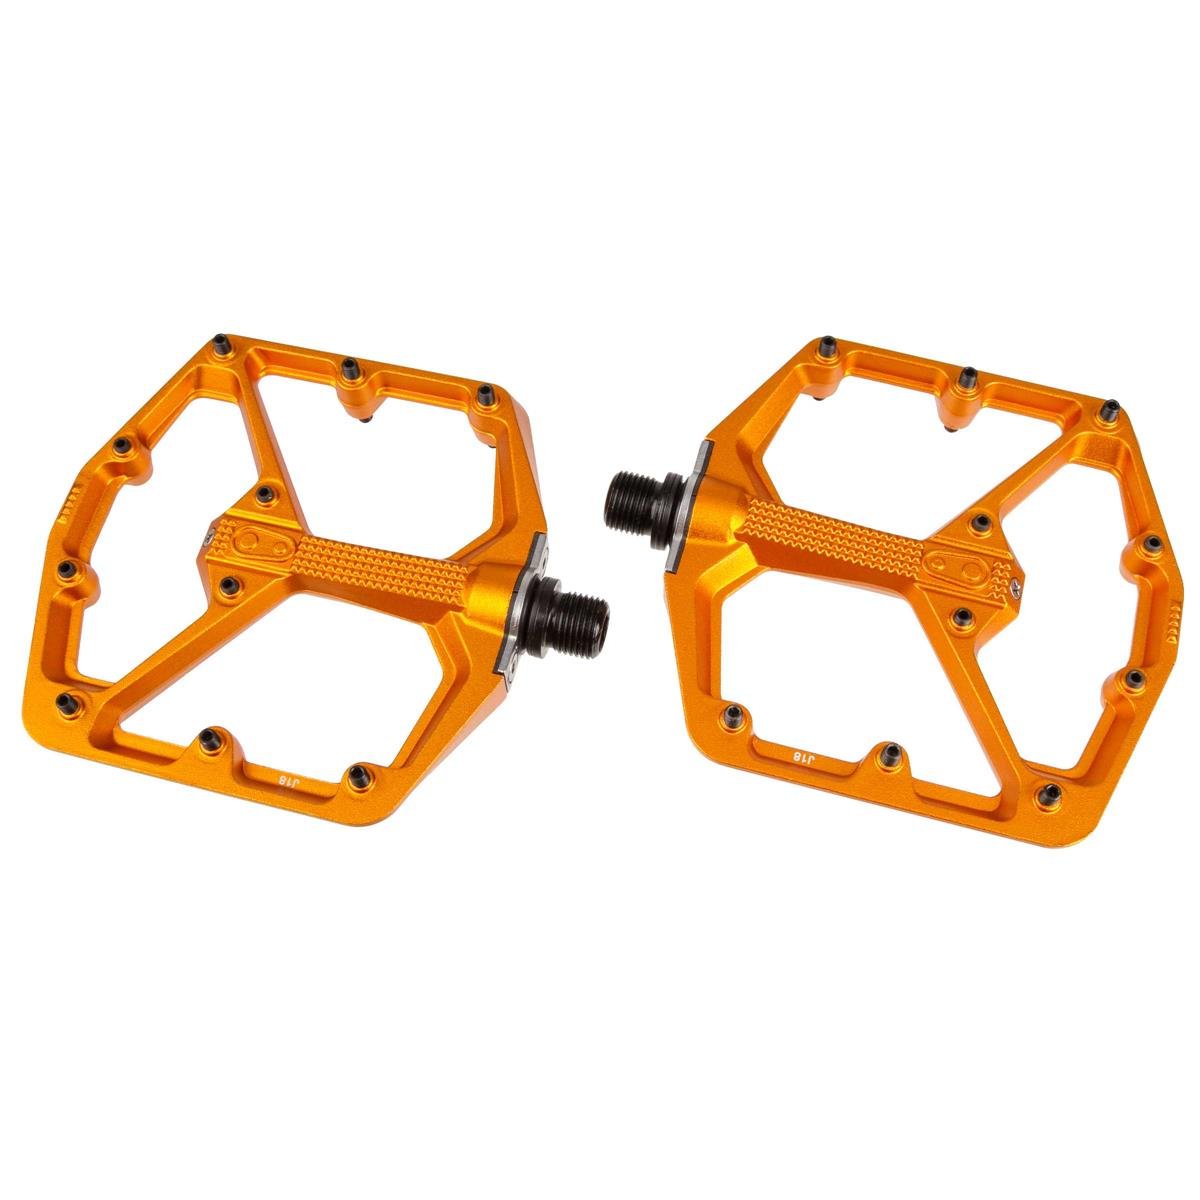 Crankbrothers Pedals Stamp 7 Limited Edition, Orange, Large